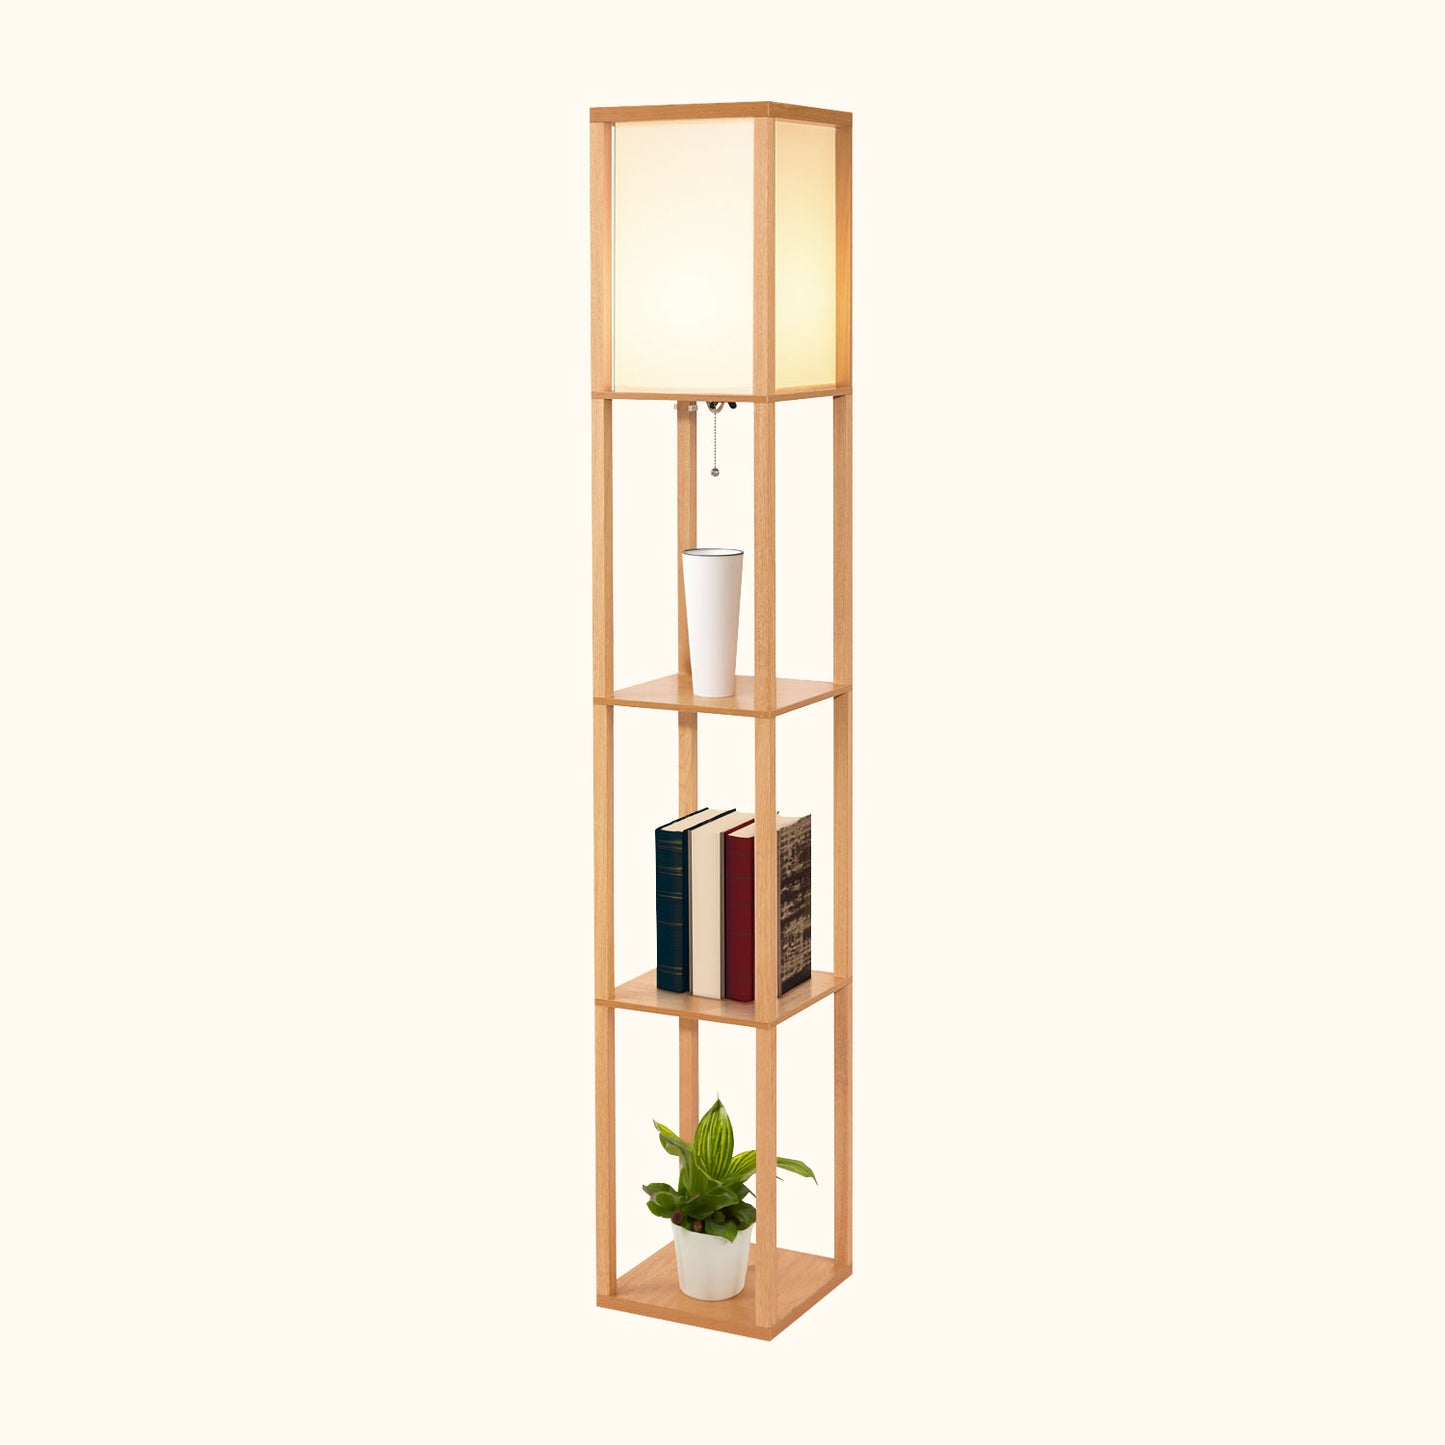 Avery 63" LED Floor Lamp with Display Shelves